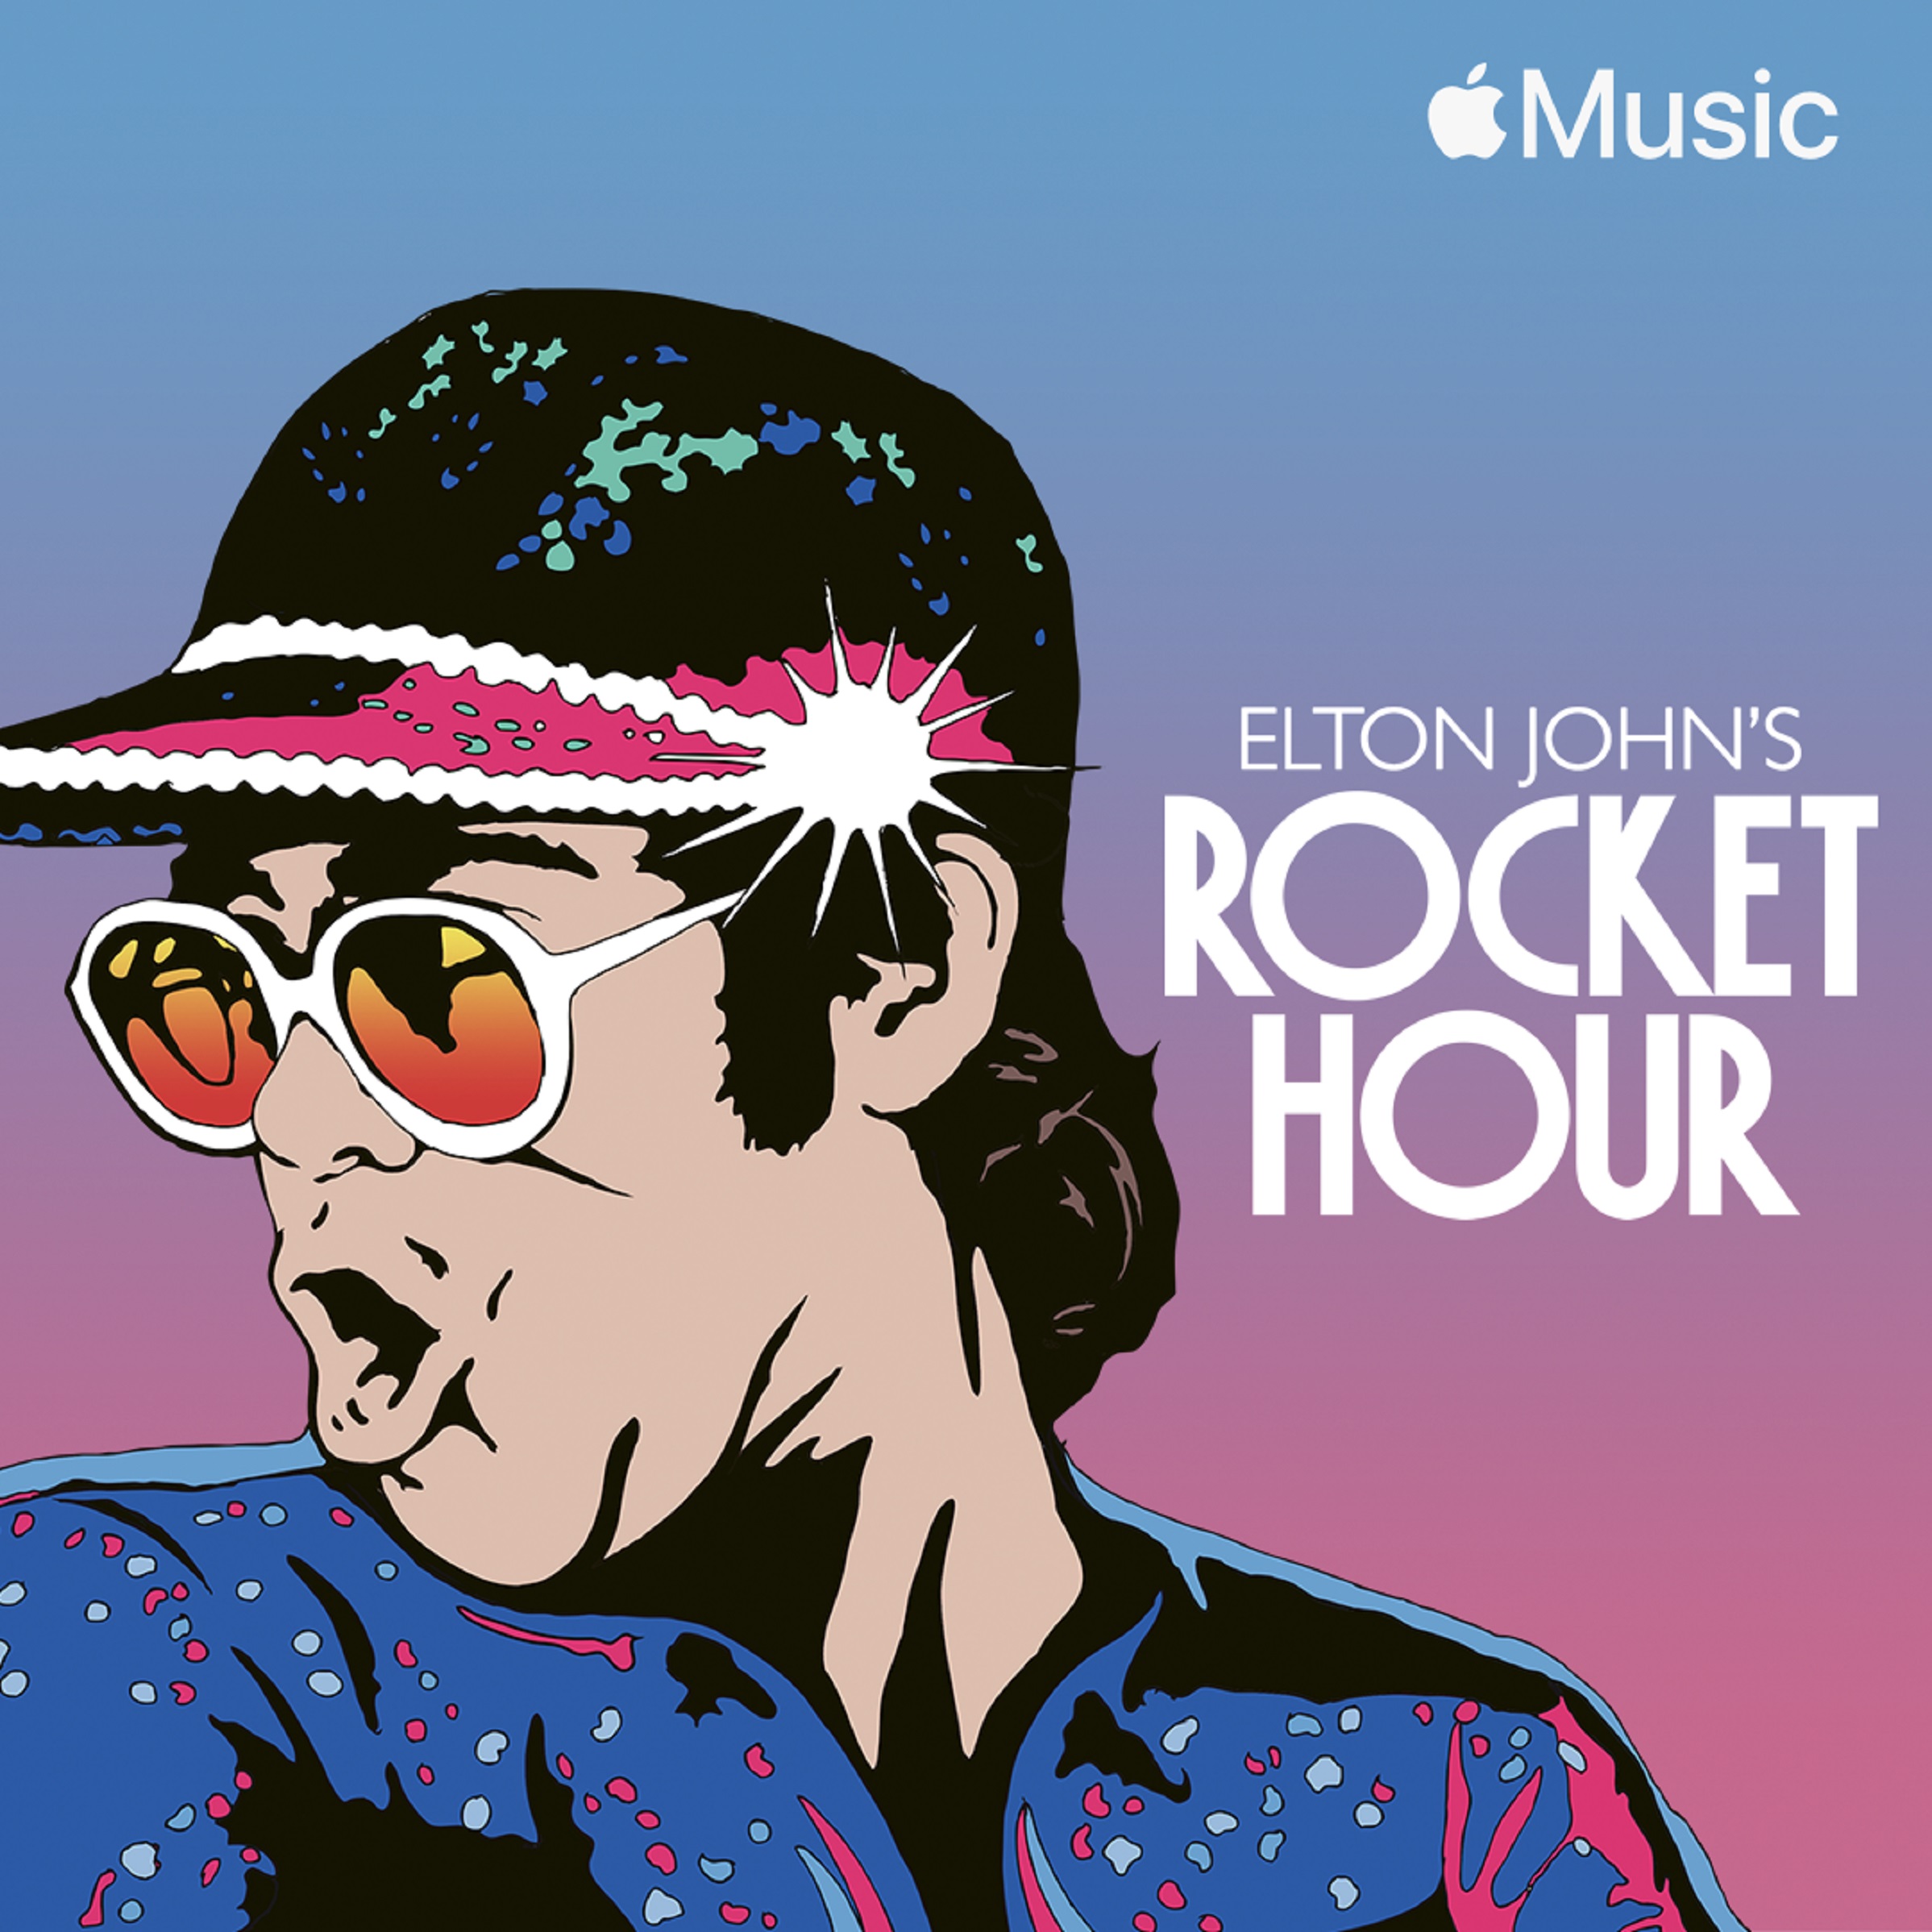 Elvis Costello Tells Elton John About His New Album ‘The Boy Named If’ On Rocket Hour On Apple Music 1